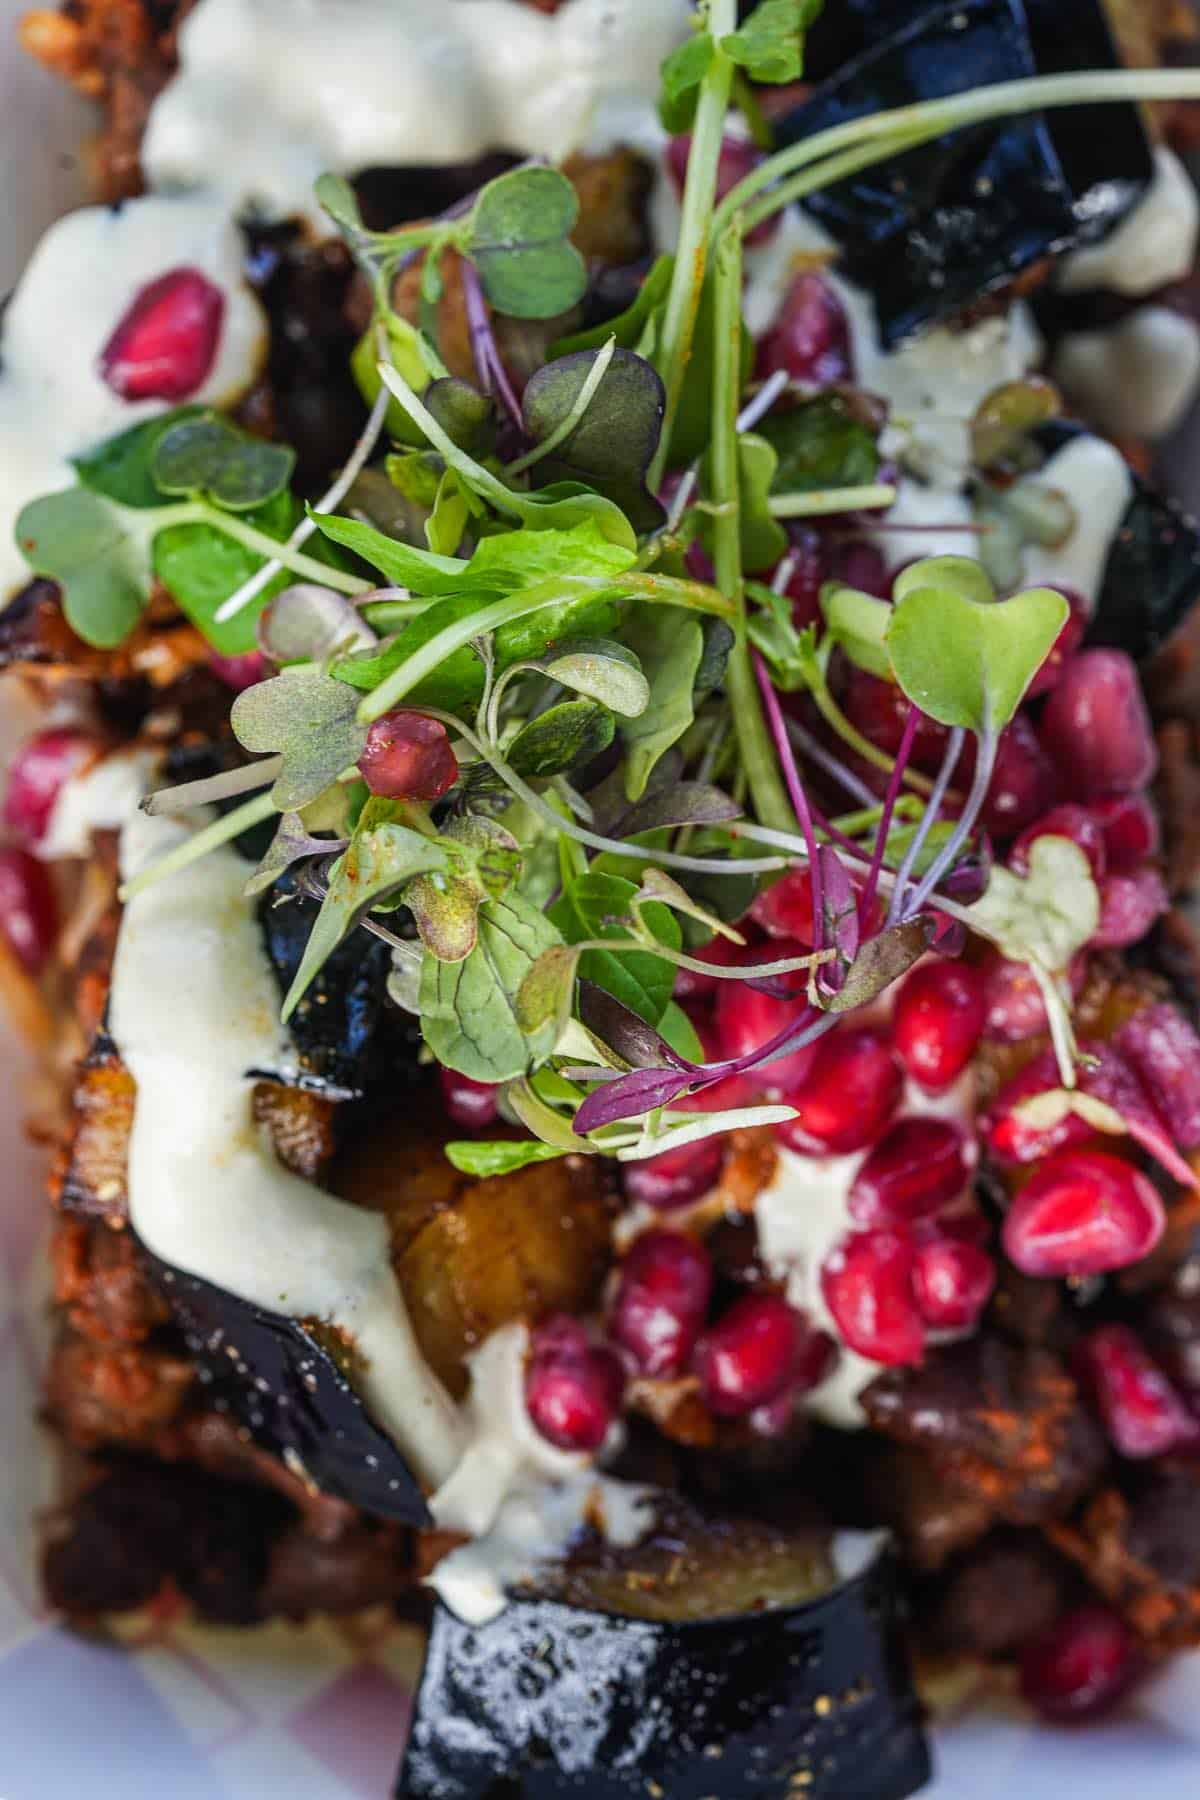 A plate of food with vegetables and pomegranate.